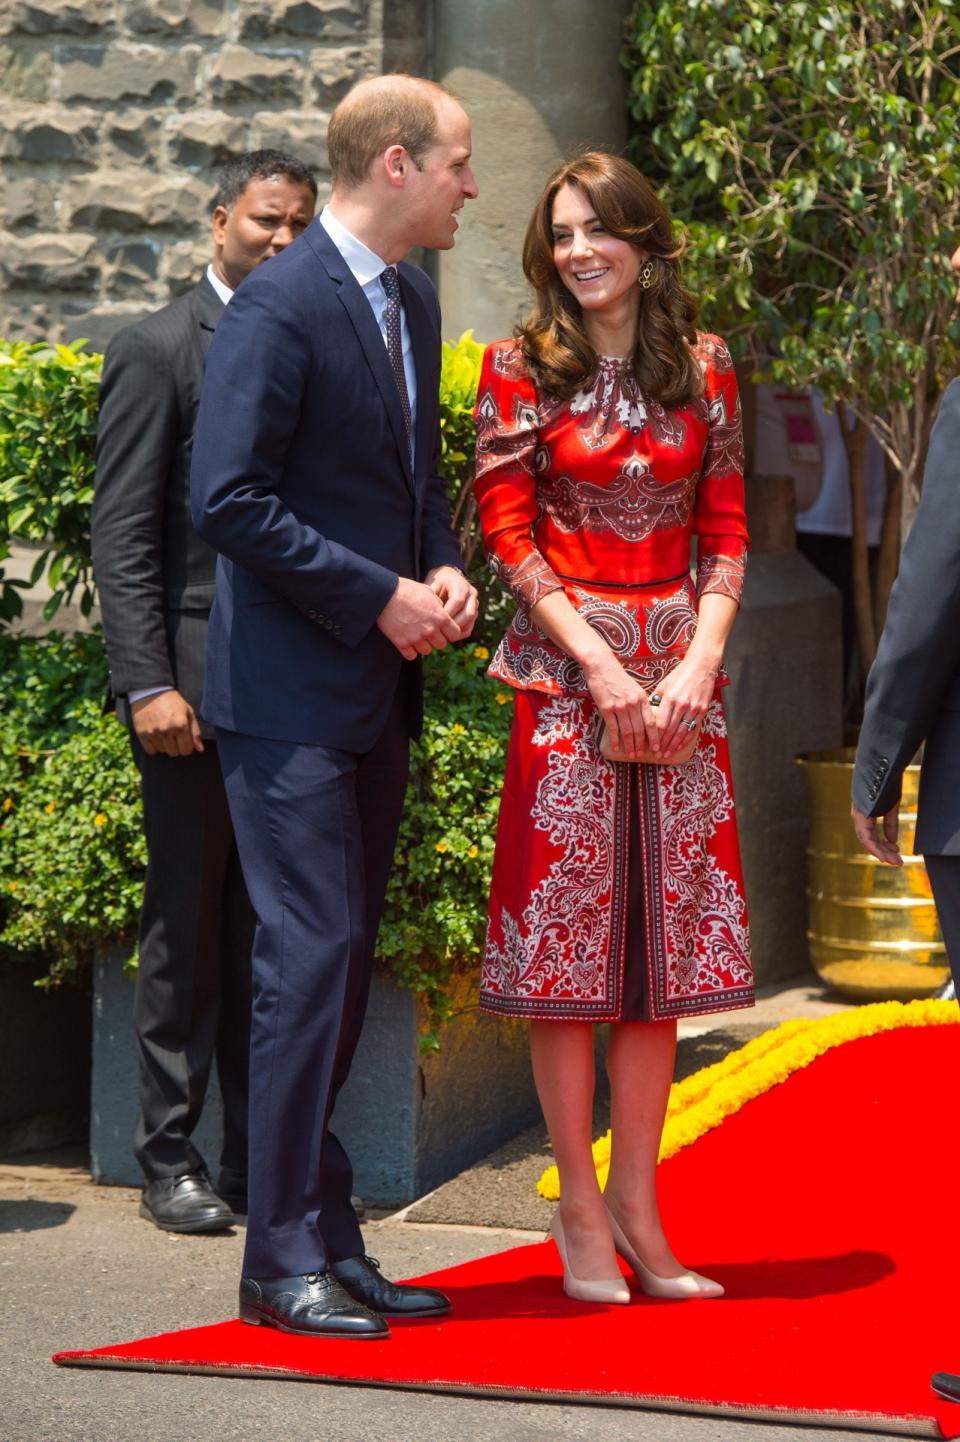 <p>For the launch of the royal tour to India, Kate chose a bespoke Alexander McQueen suit featuring a peplum top and oriental print. L.K. Bennett heels and a suede clutch by Russell and Bromley complemented the ensemble. </p><p><i>[Photo: PA]</i></p>